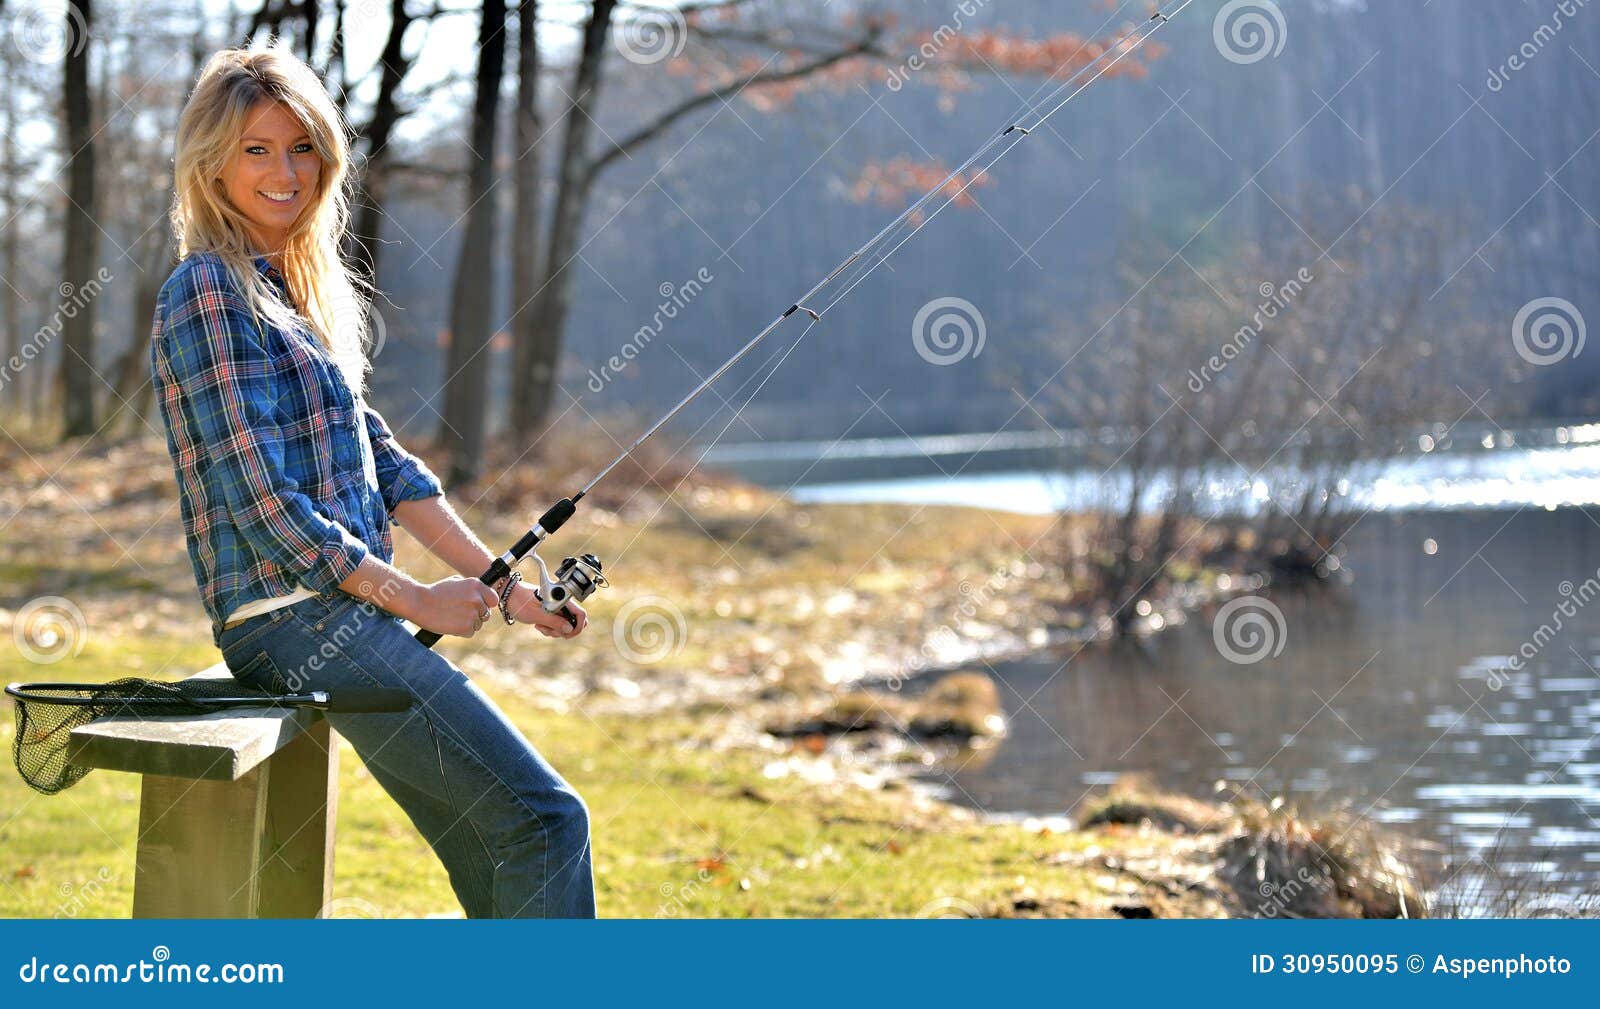 https://thumbs.dreamstime.com/z/stunning-young-blonde-woman-fishing-blue-flannel-shirt-sitting-bench-pond-30950095.jpg